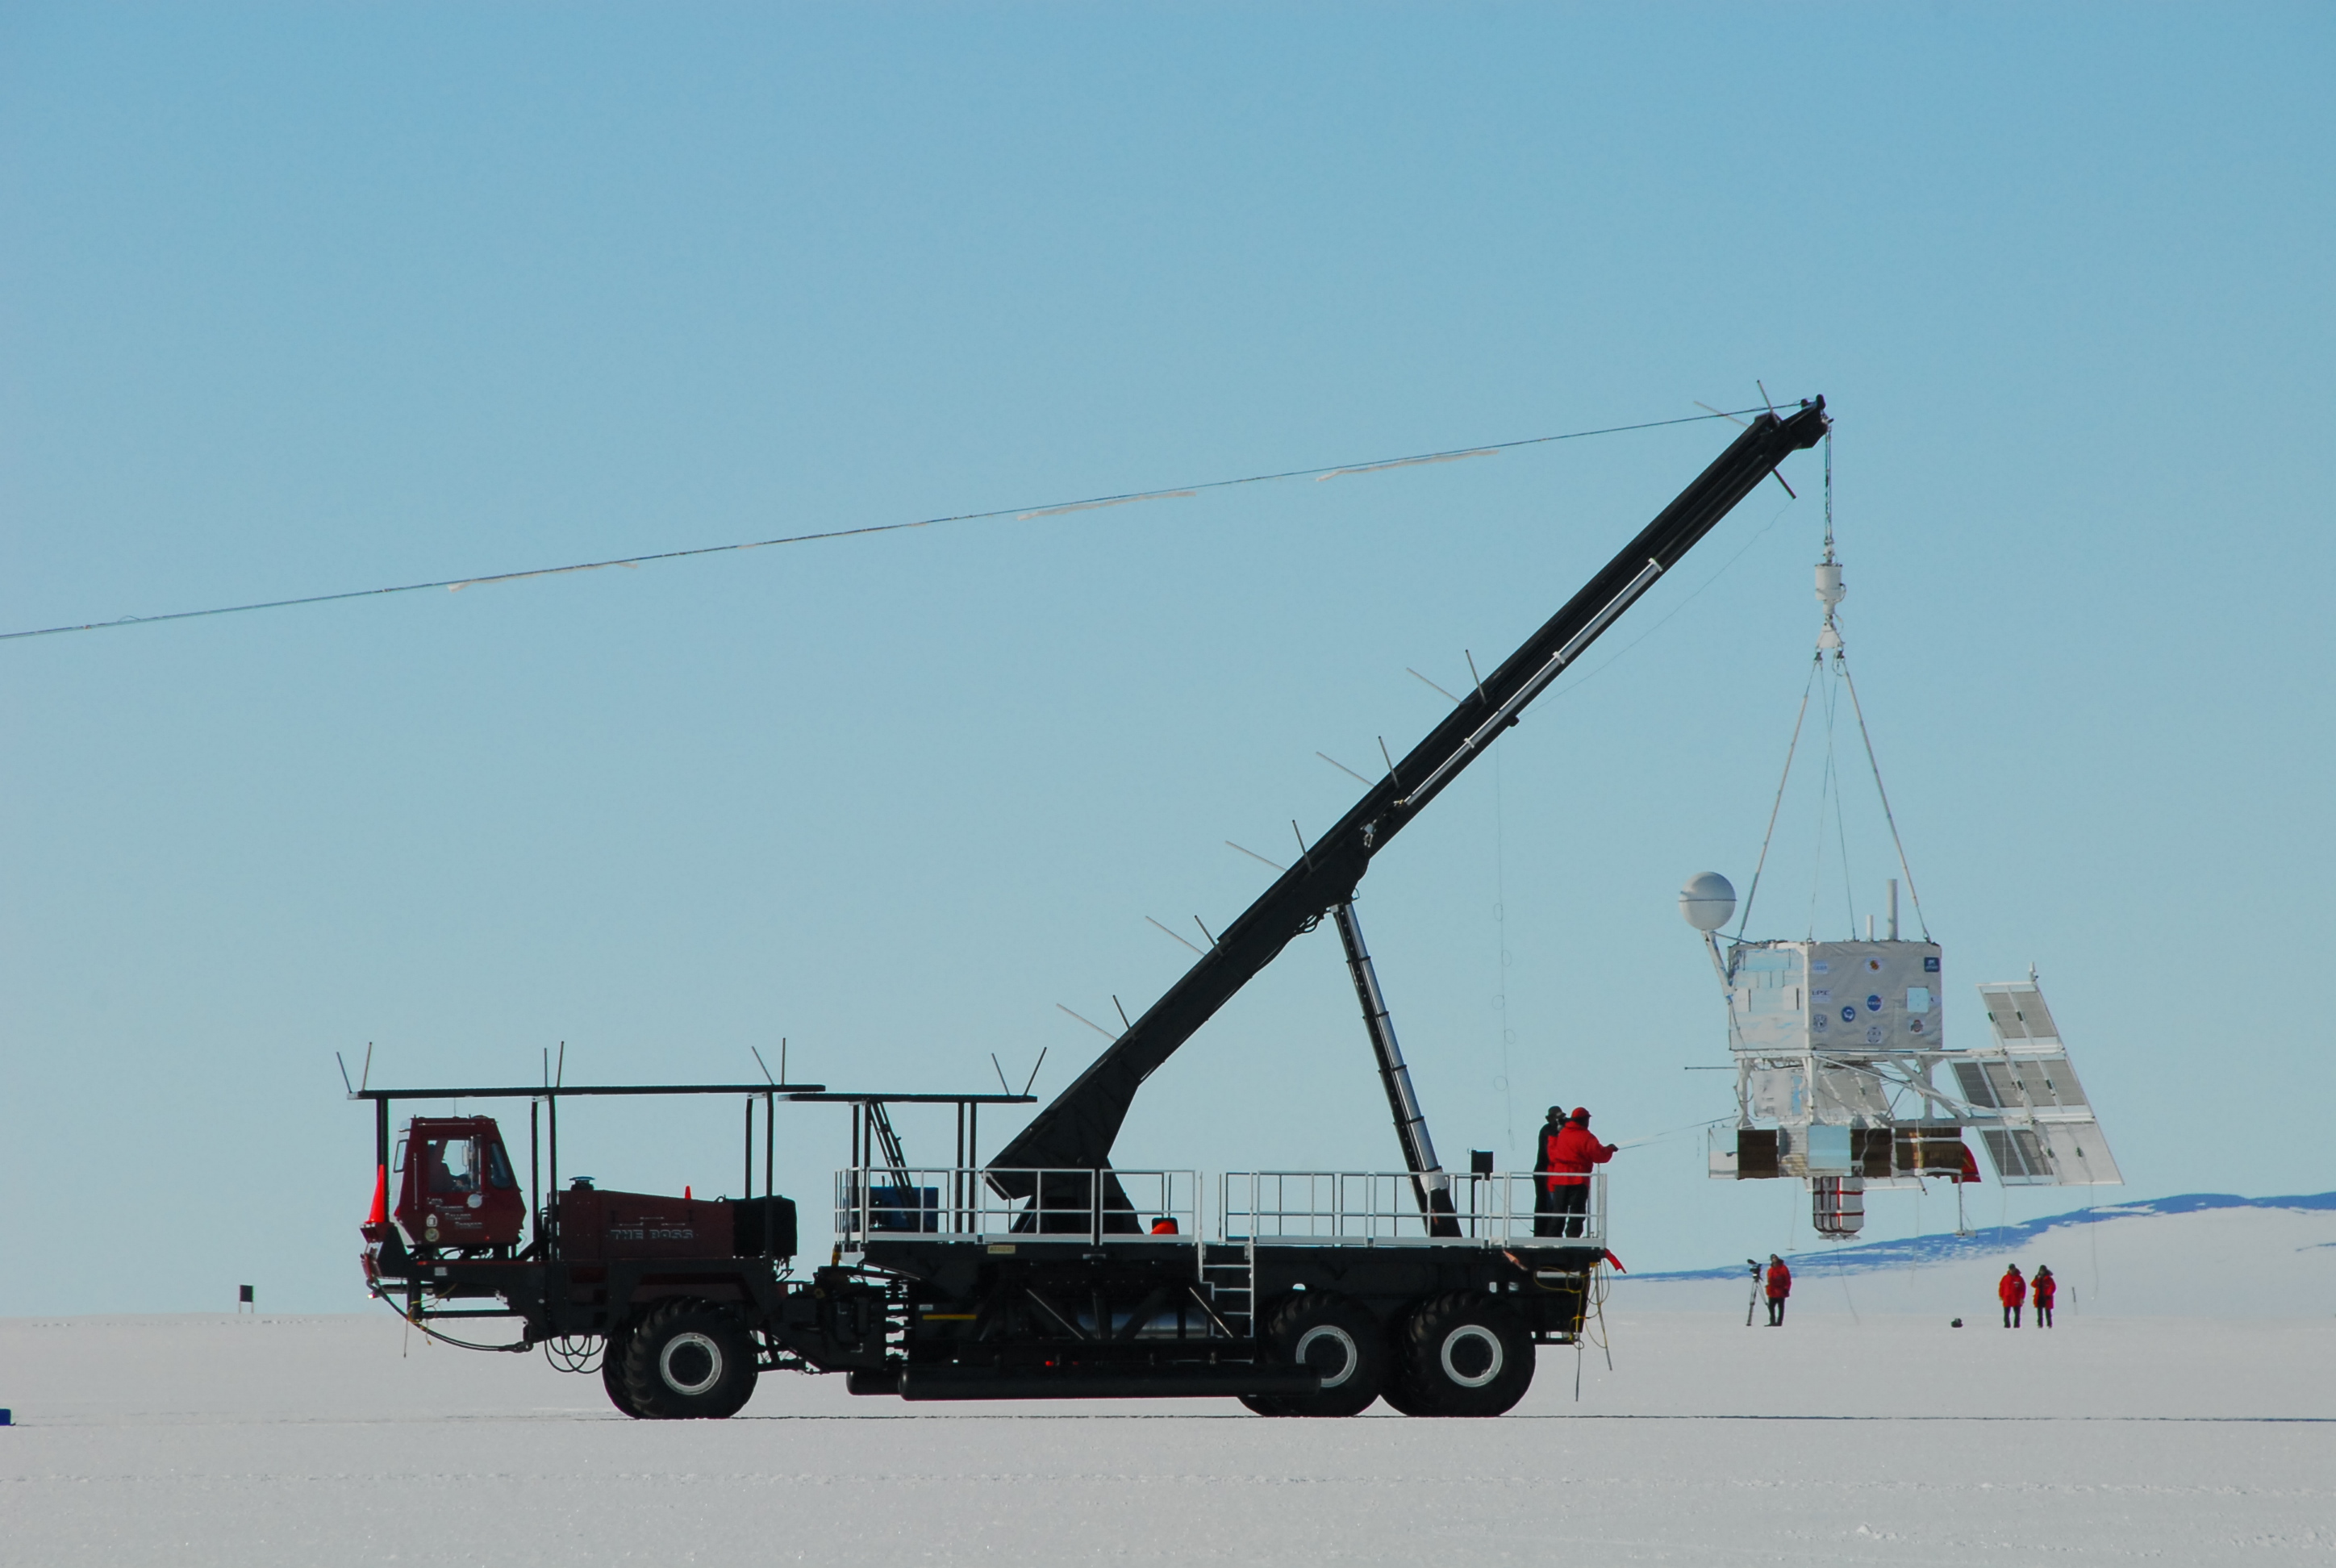 A large objects dangles off the end of a truck.